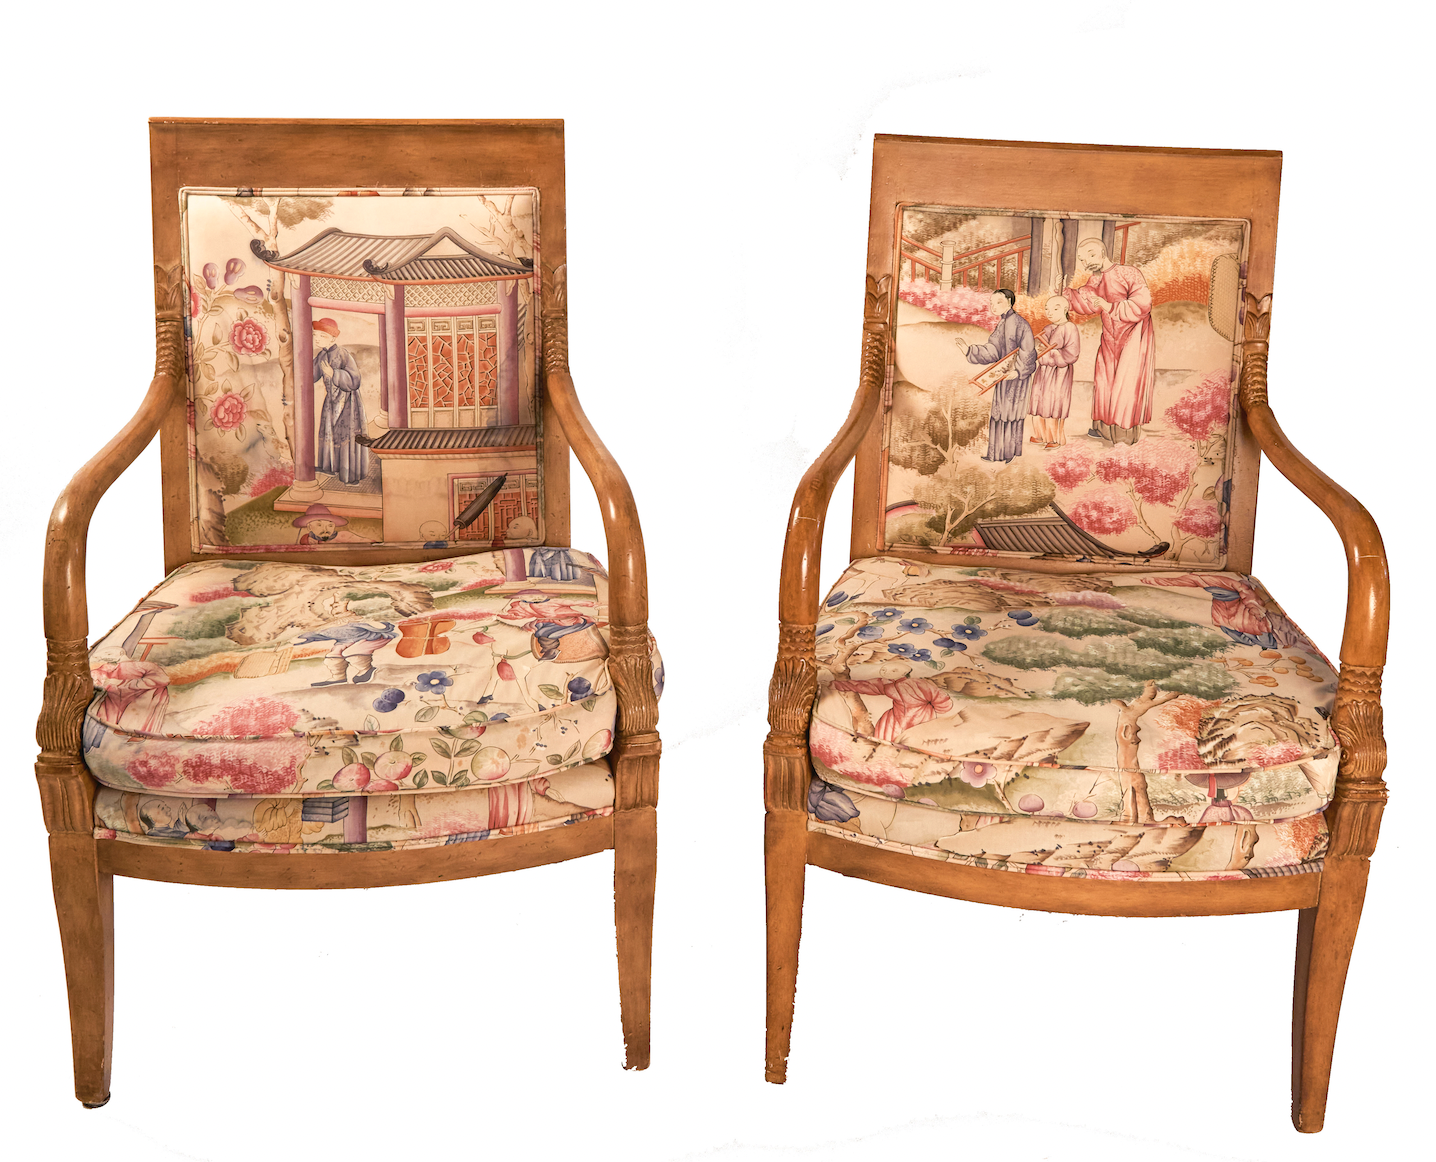 French Empire-style fruitwood arm chairs, est. $500-$700